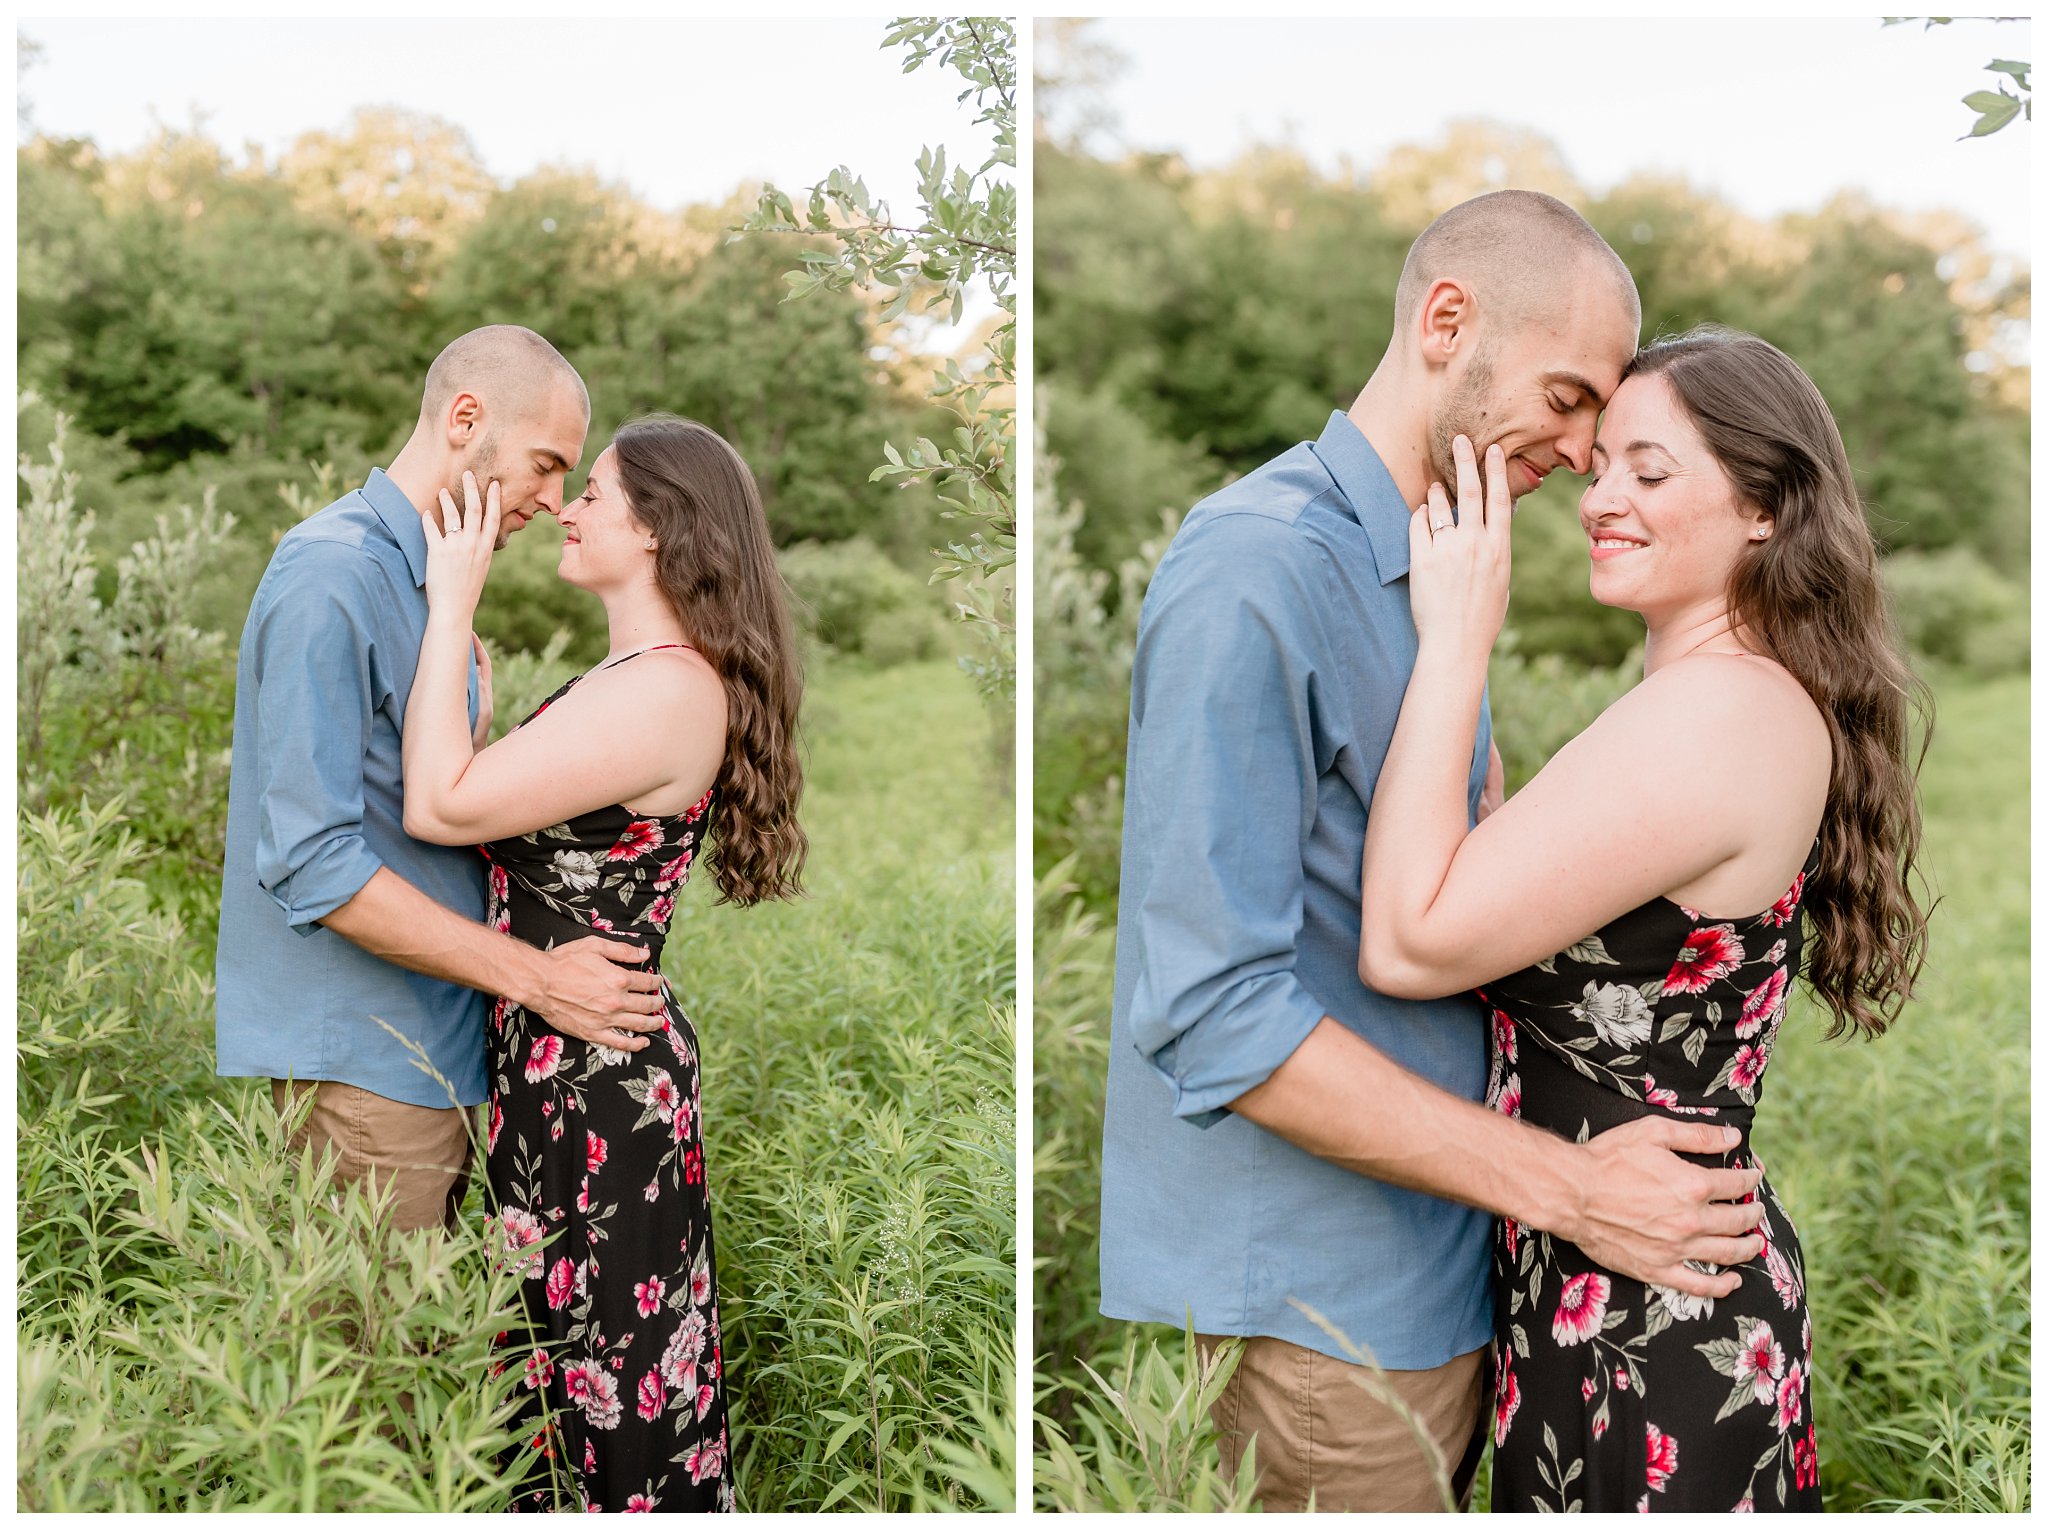 Salmon River Falls Engagement Session Joanna Young Photography_0021.jpg